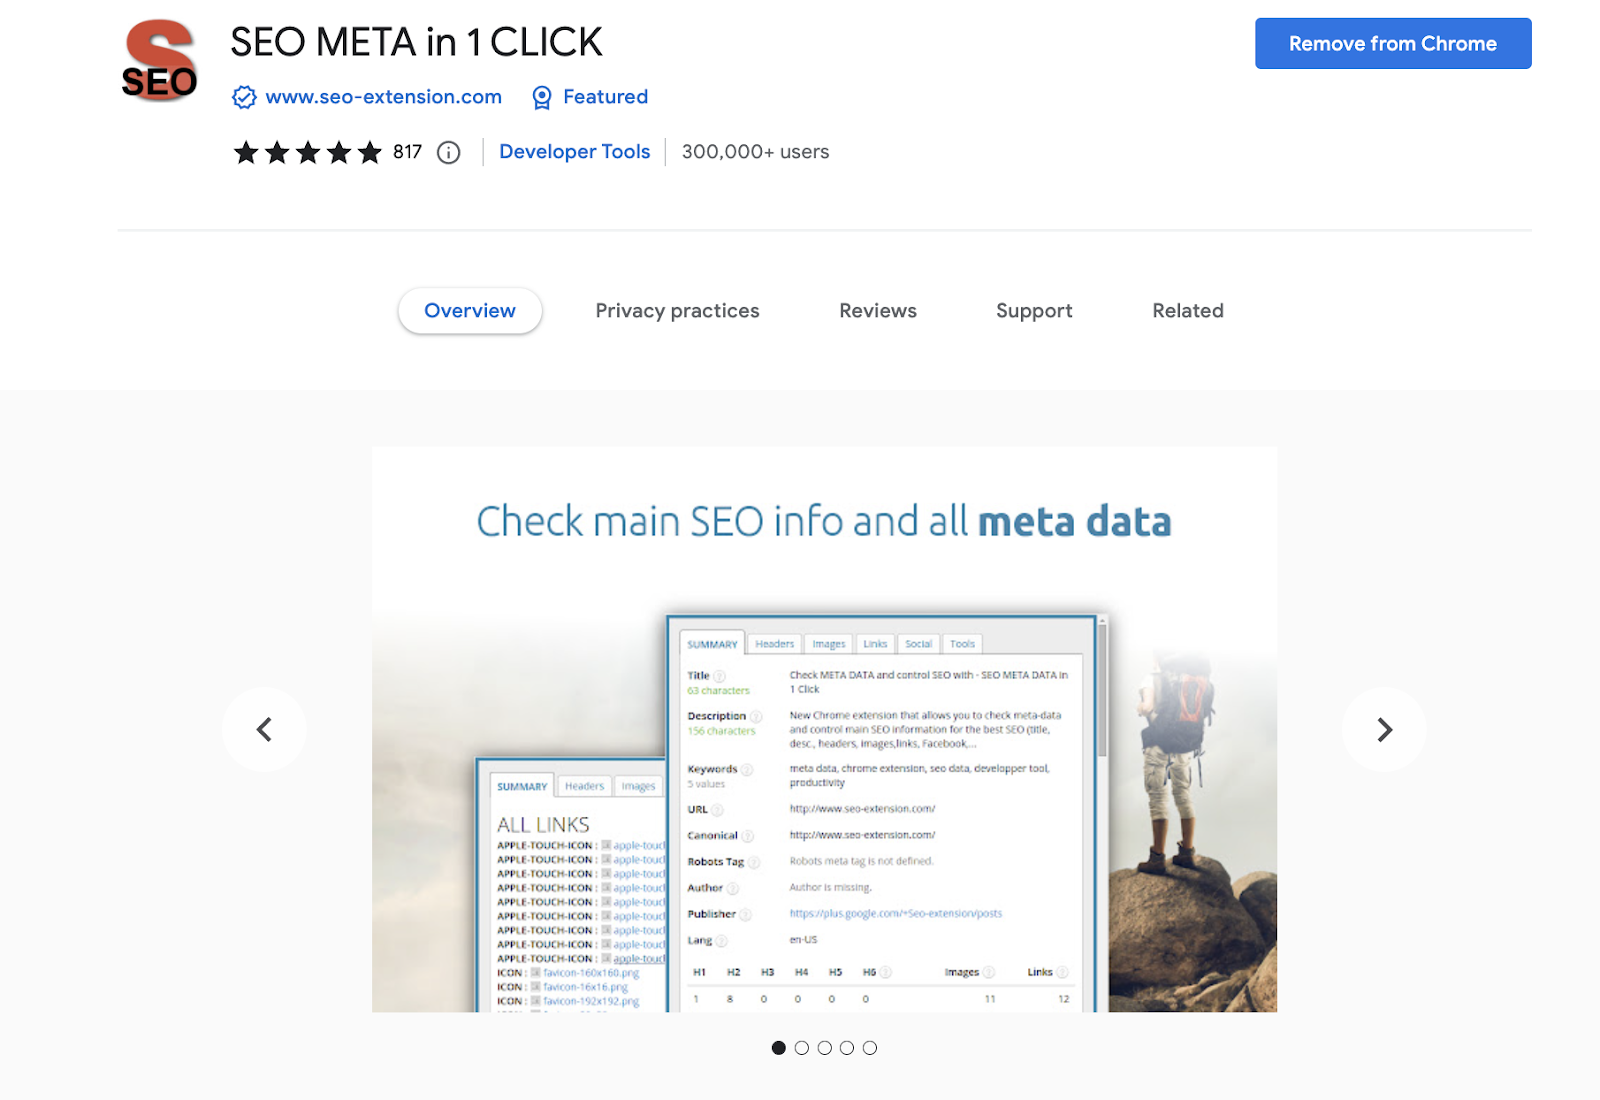 Chrome store page for SEO Meta in 1 click